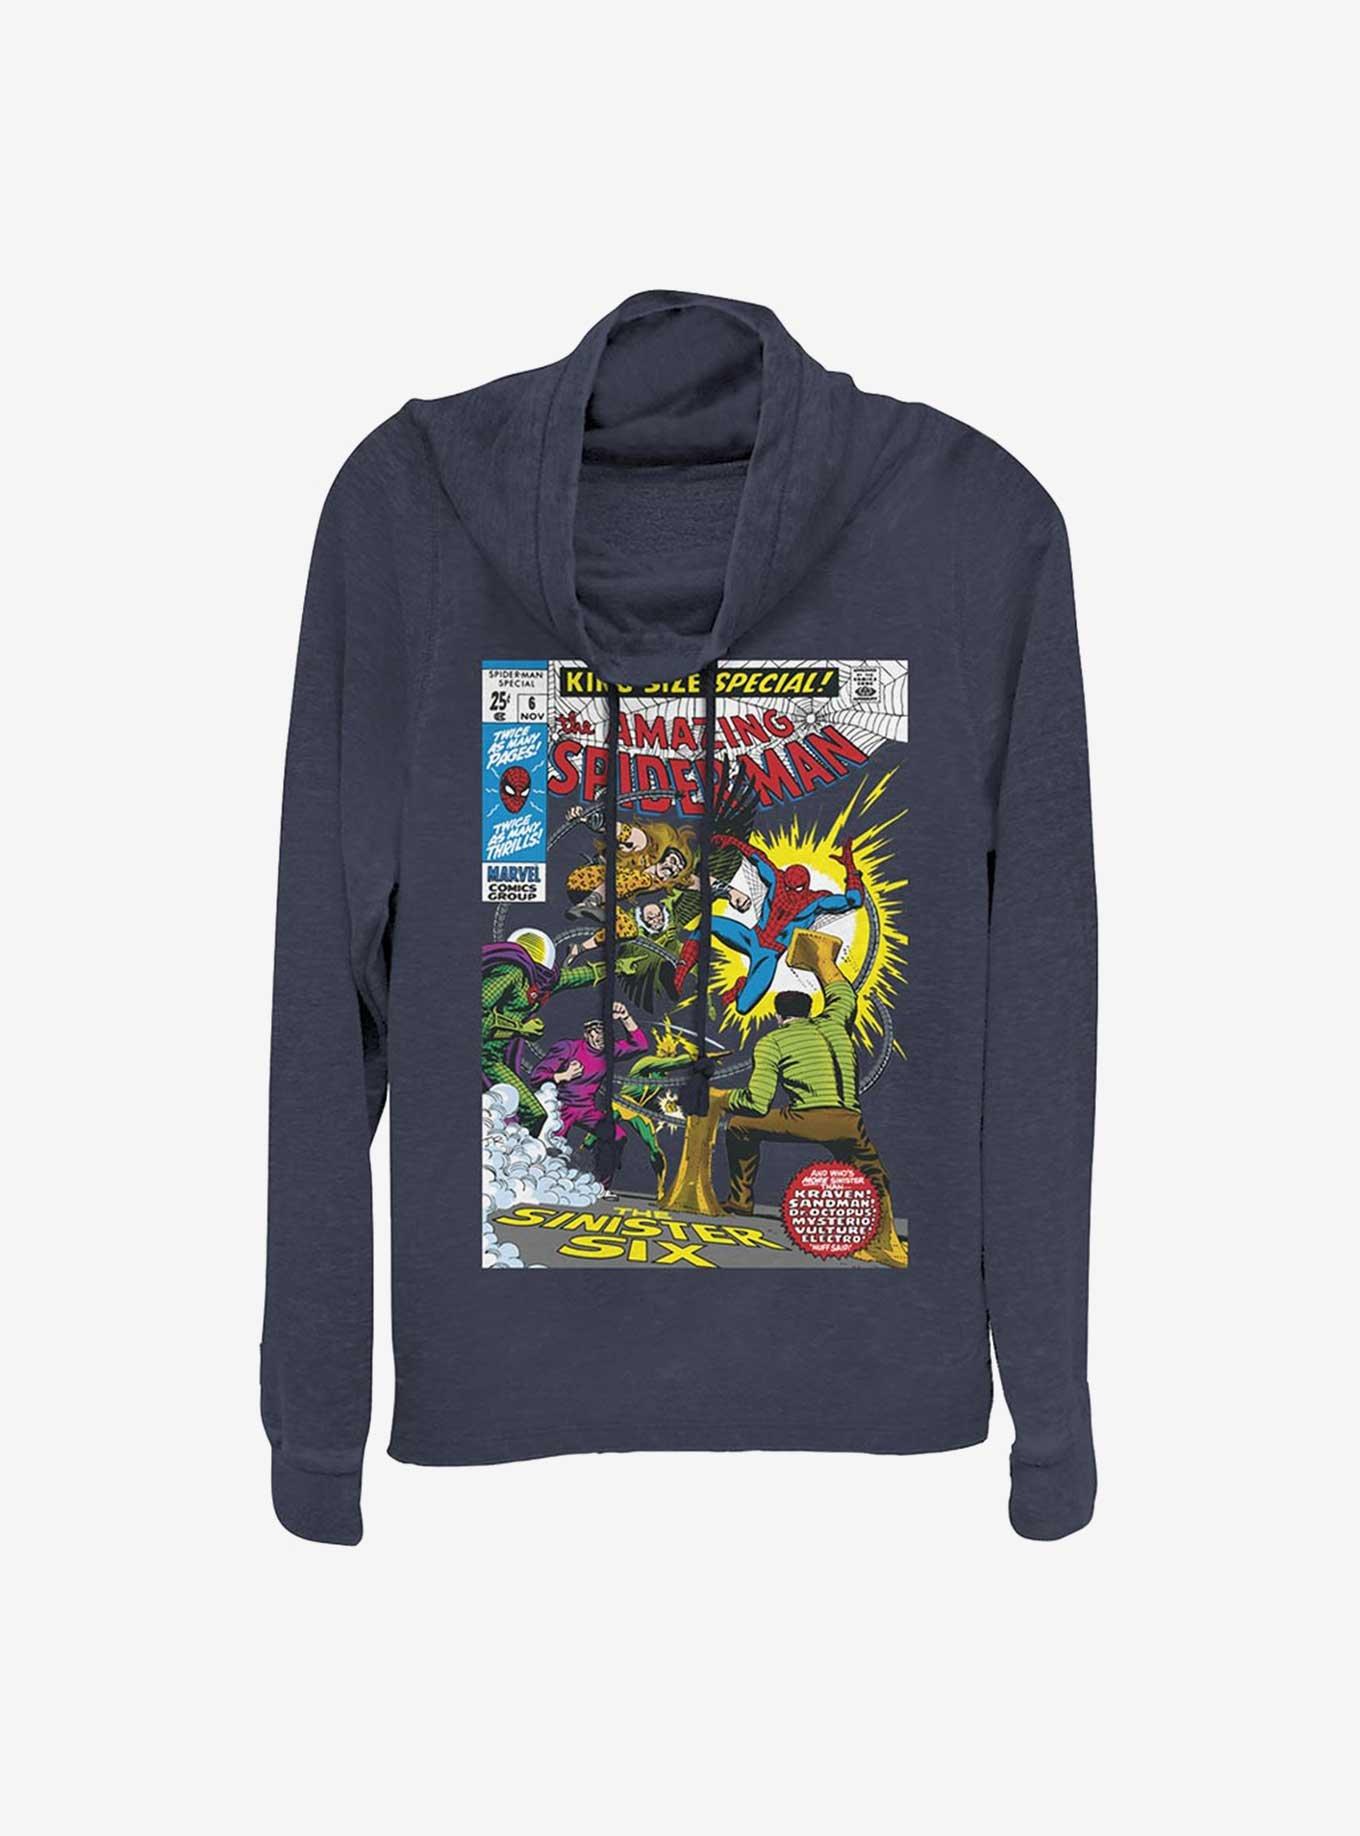 Marvel Spider-Man The Sinister Six Comic Cowl Neck Long-Sleeve Top, NAVY, hi-res